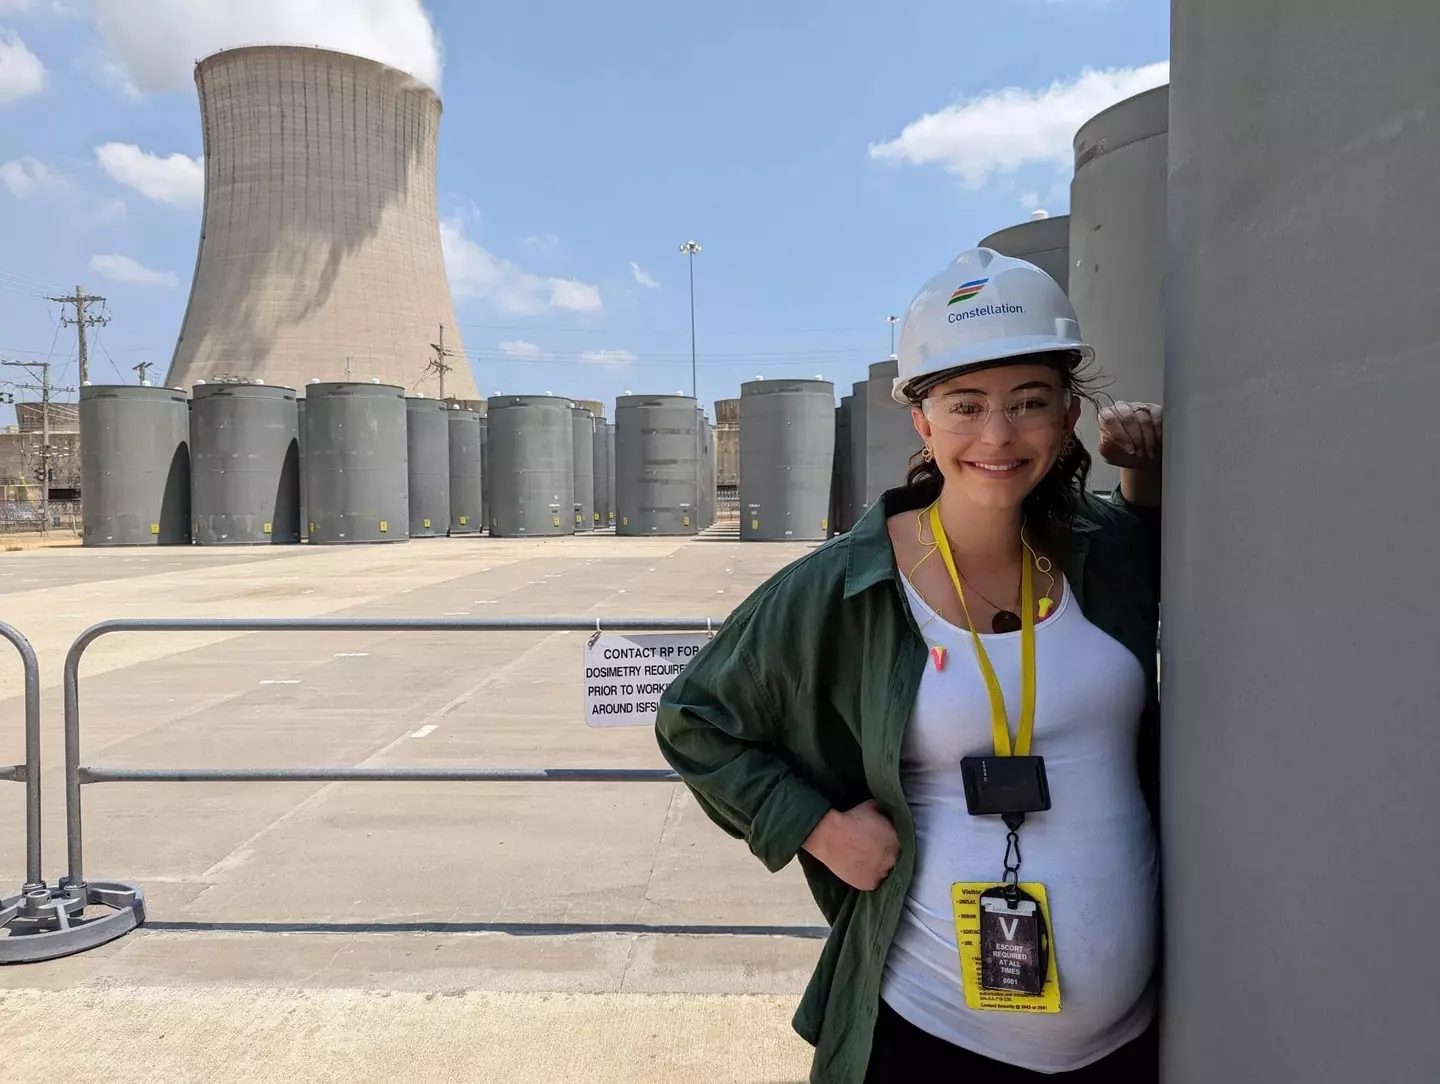 The pro-nuclear energy campaigner wants to prove it's safe by getting her baby bump close to nuclear waste containers.